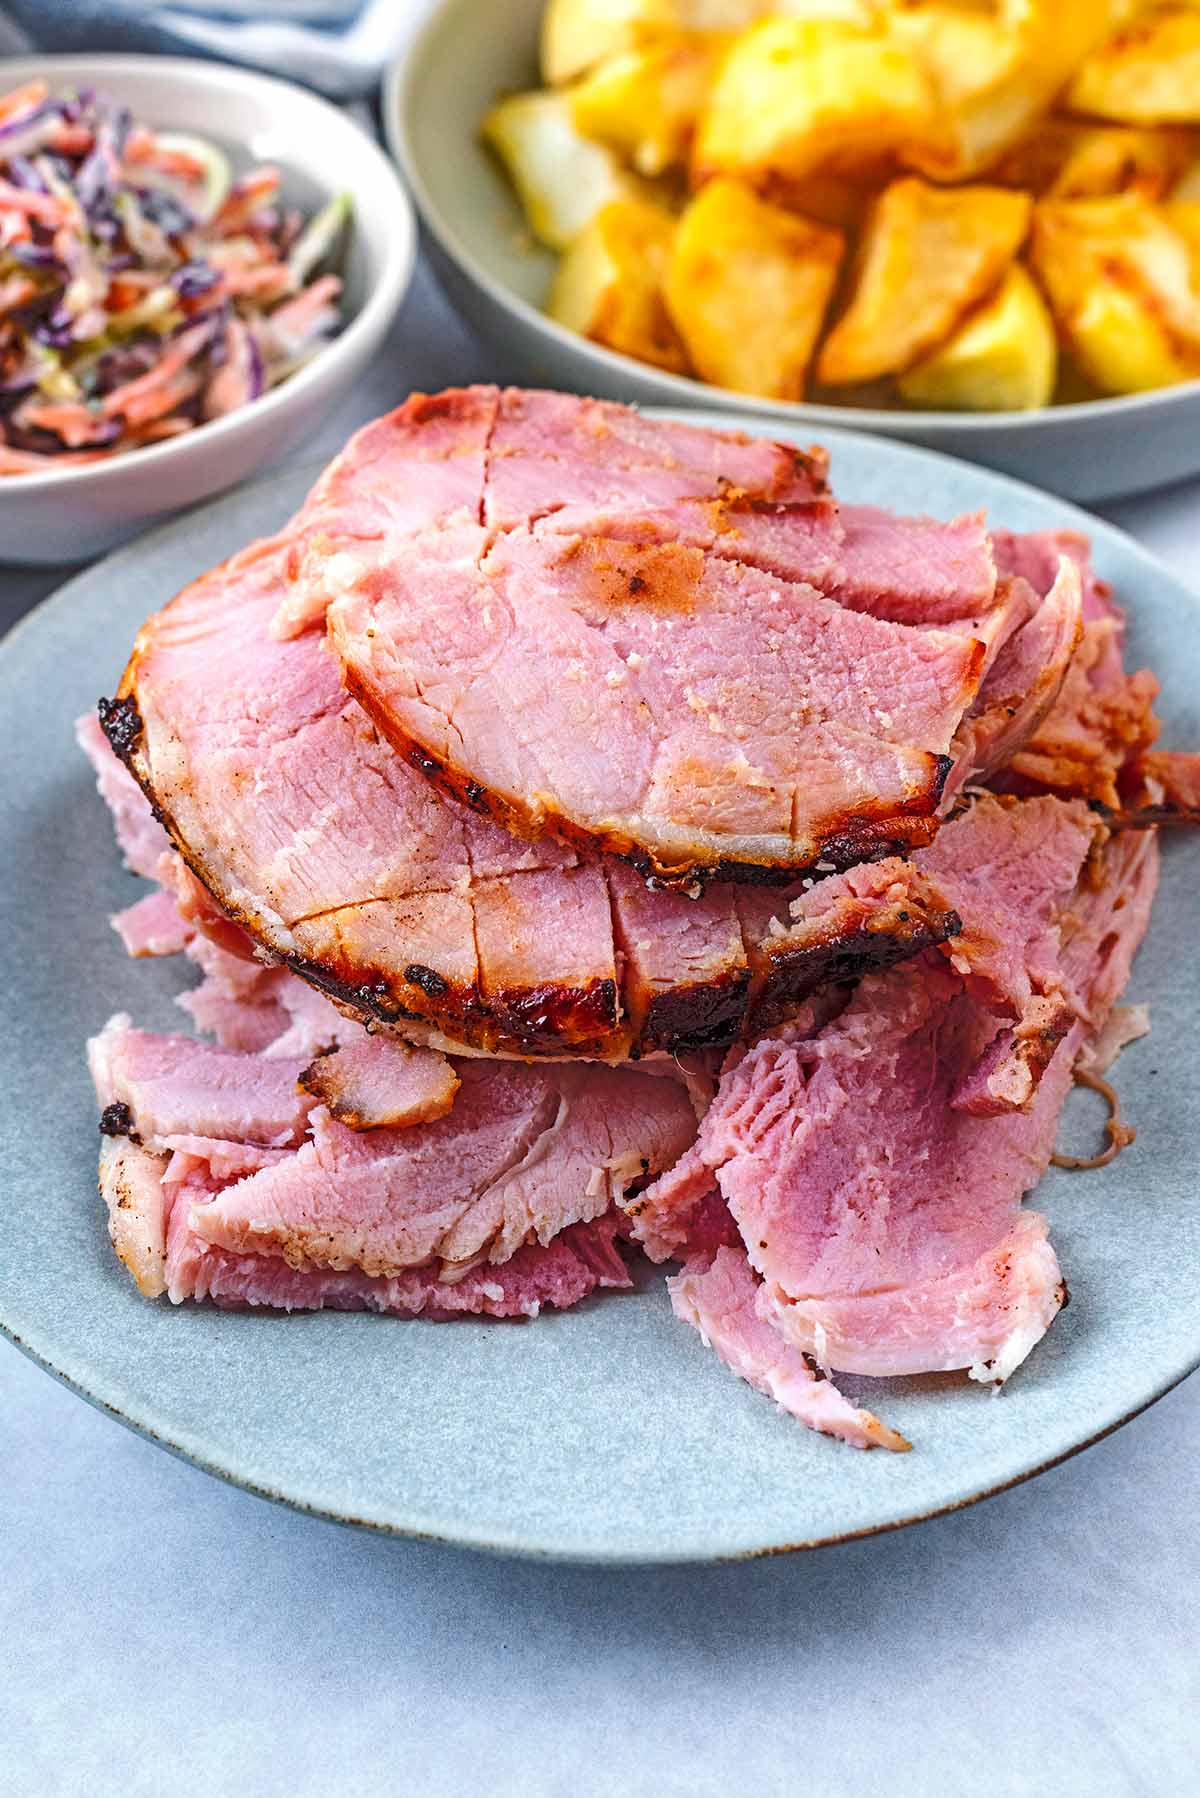 Slices of cooked ham in front of some roast potatoes.